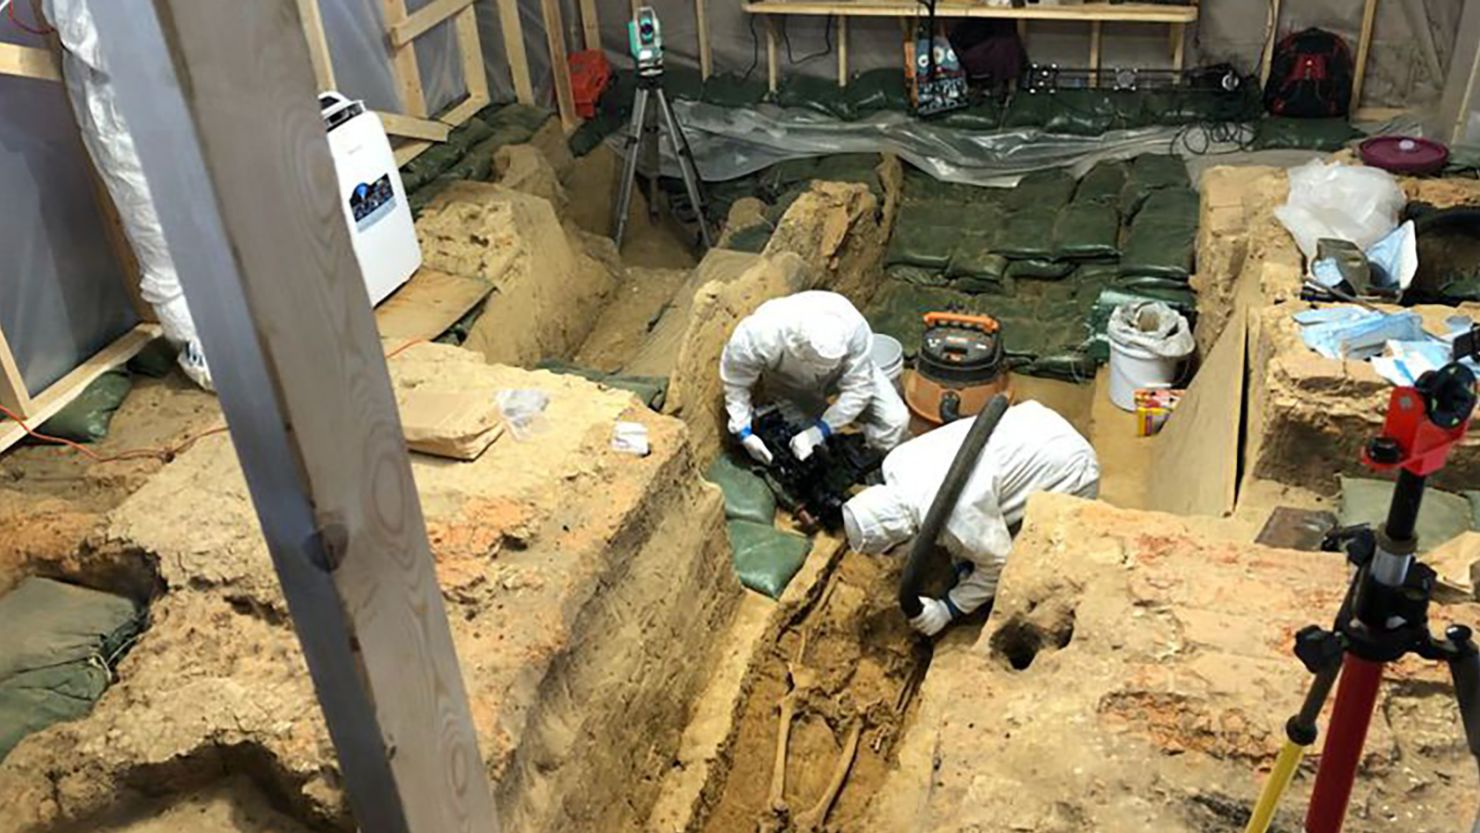 Scientists don full-body suits to minimize disturbance of the precious artifacts uncovered in a 1617 church in Jamestown, Virginia, where a newly found skeleton awaits identification. 